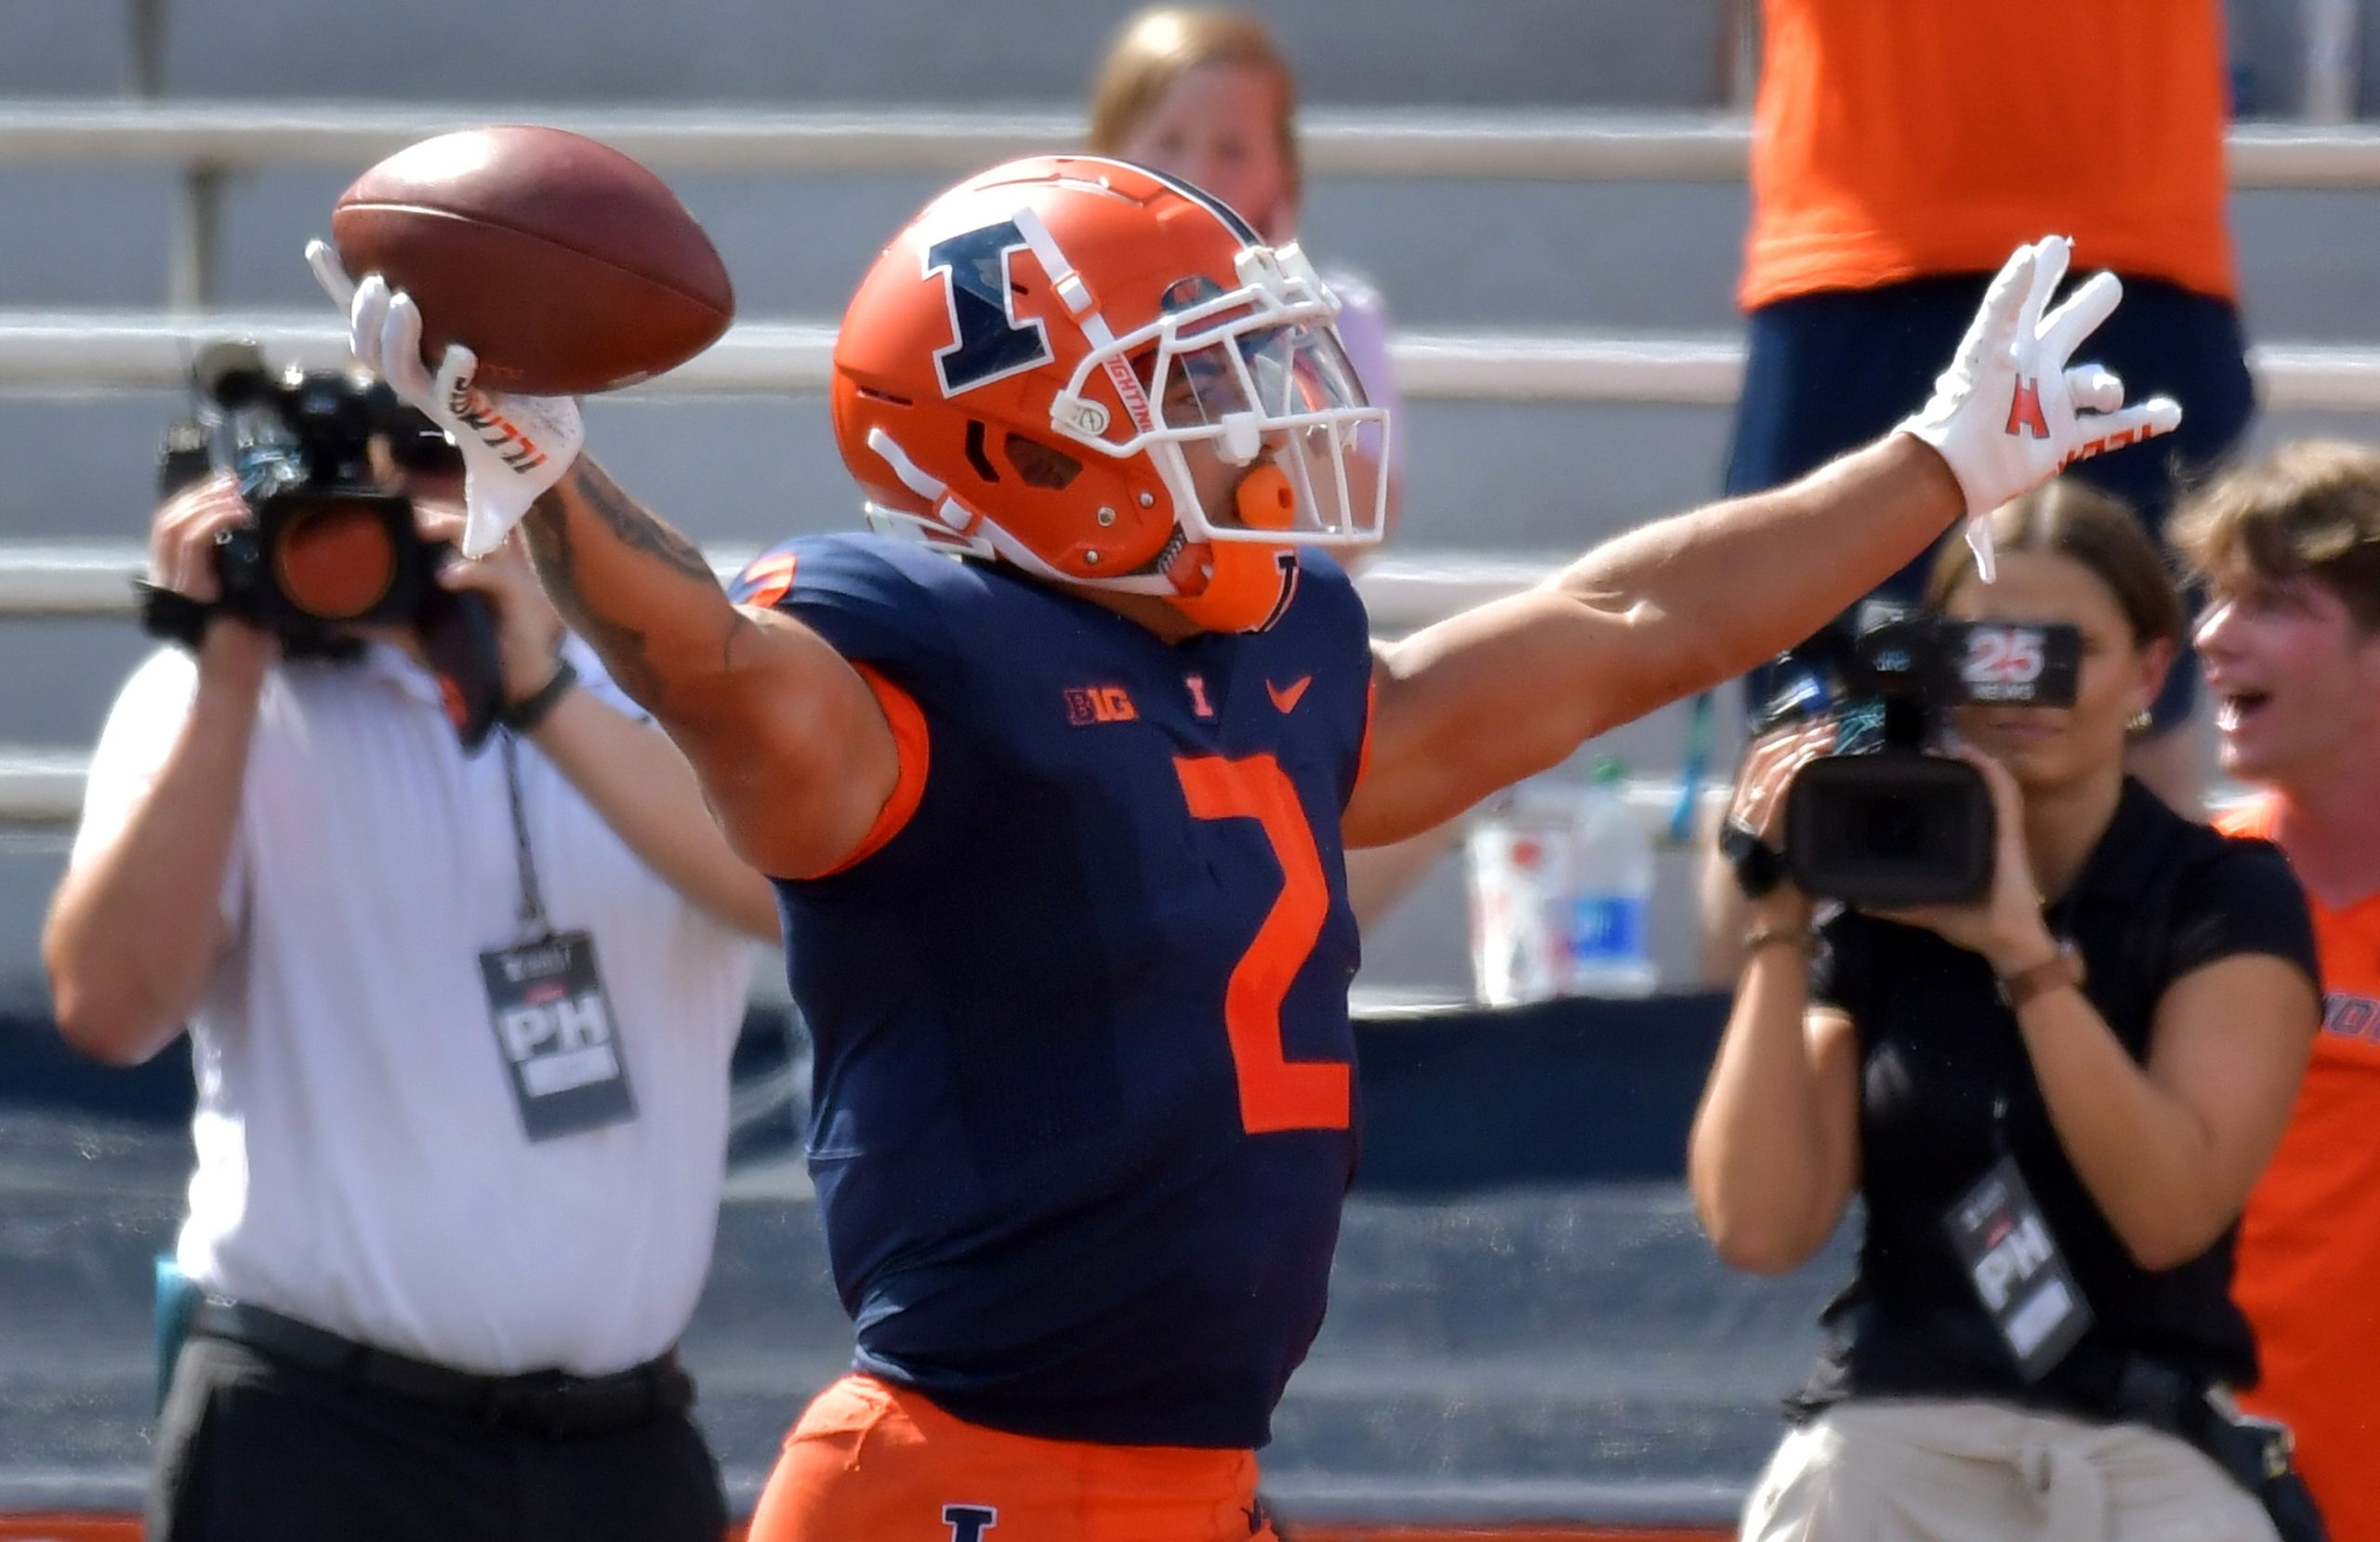 Chase Me: Brown’s Patience Leads To 151 Rushing Yards in Illini Win